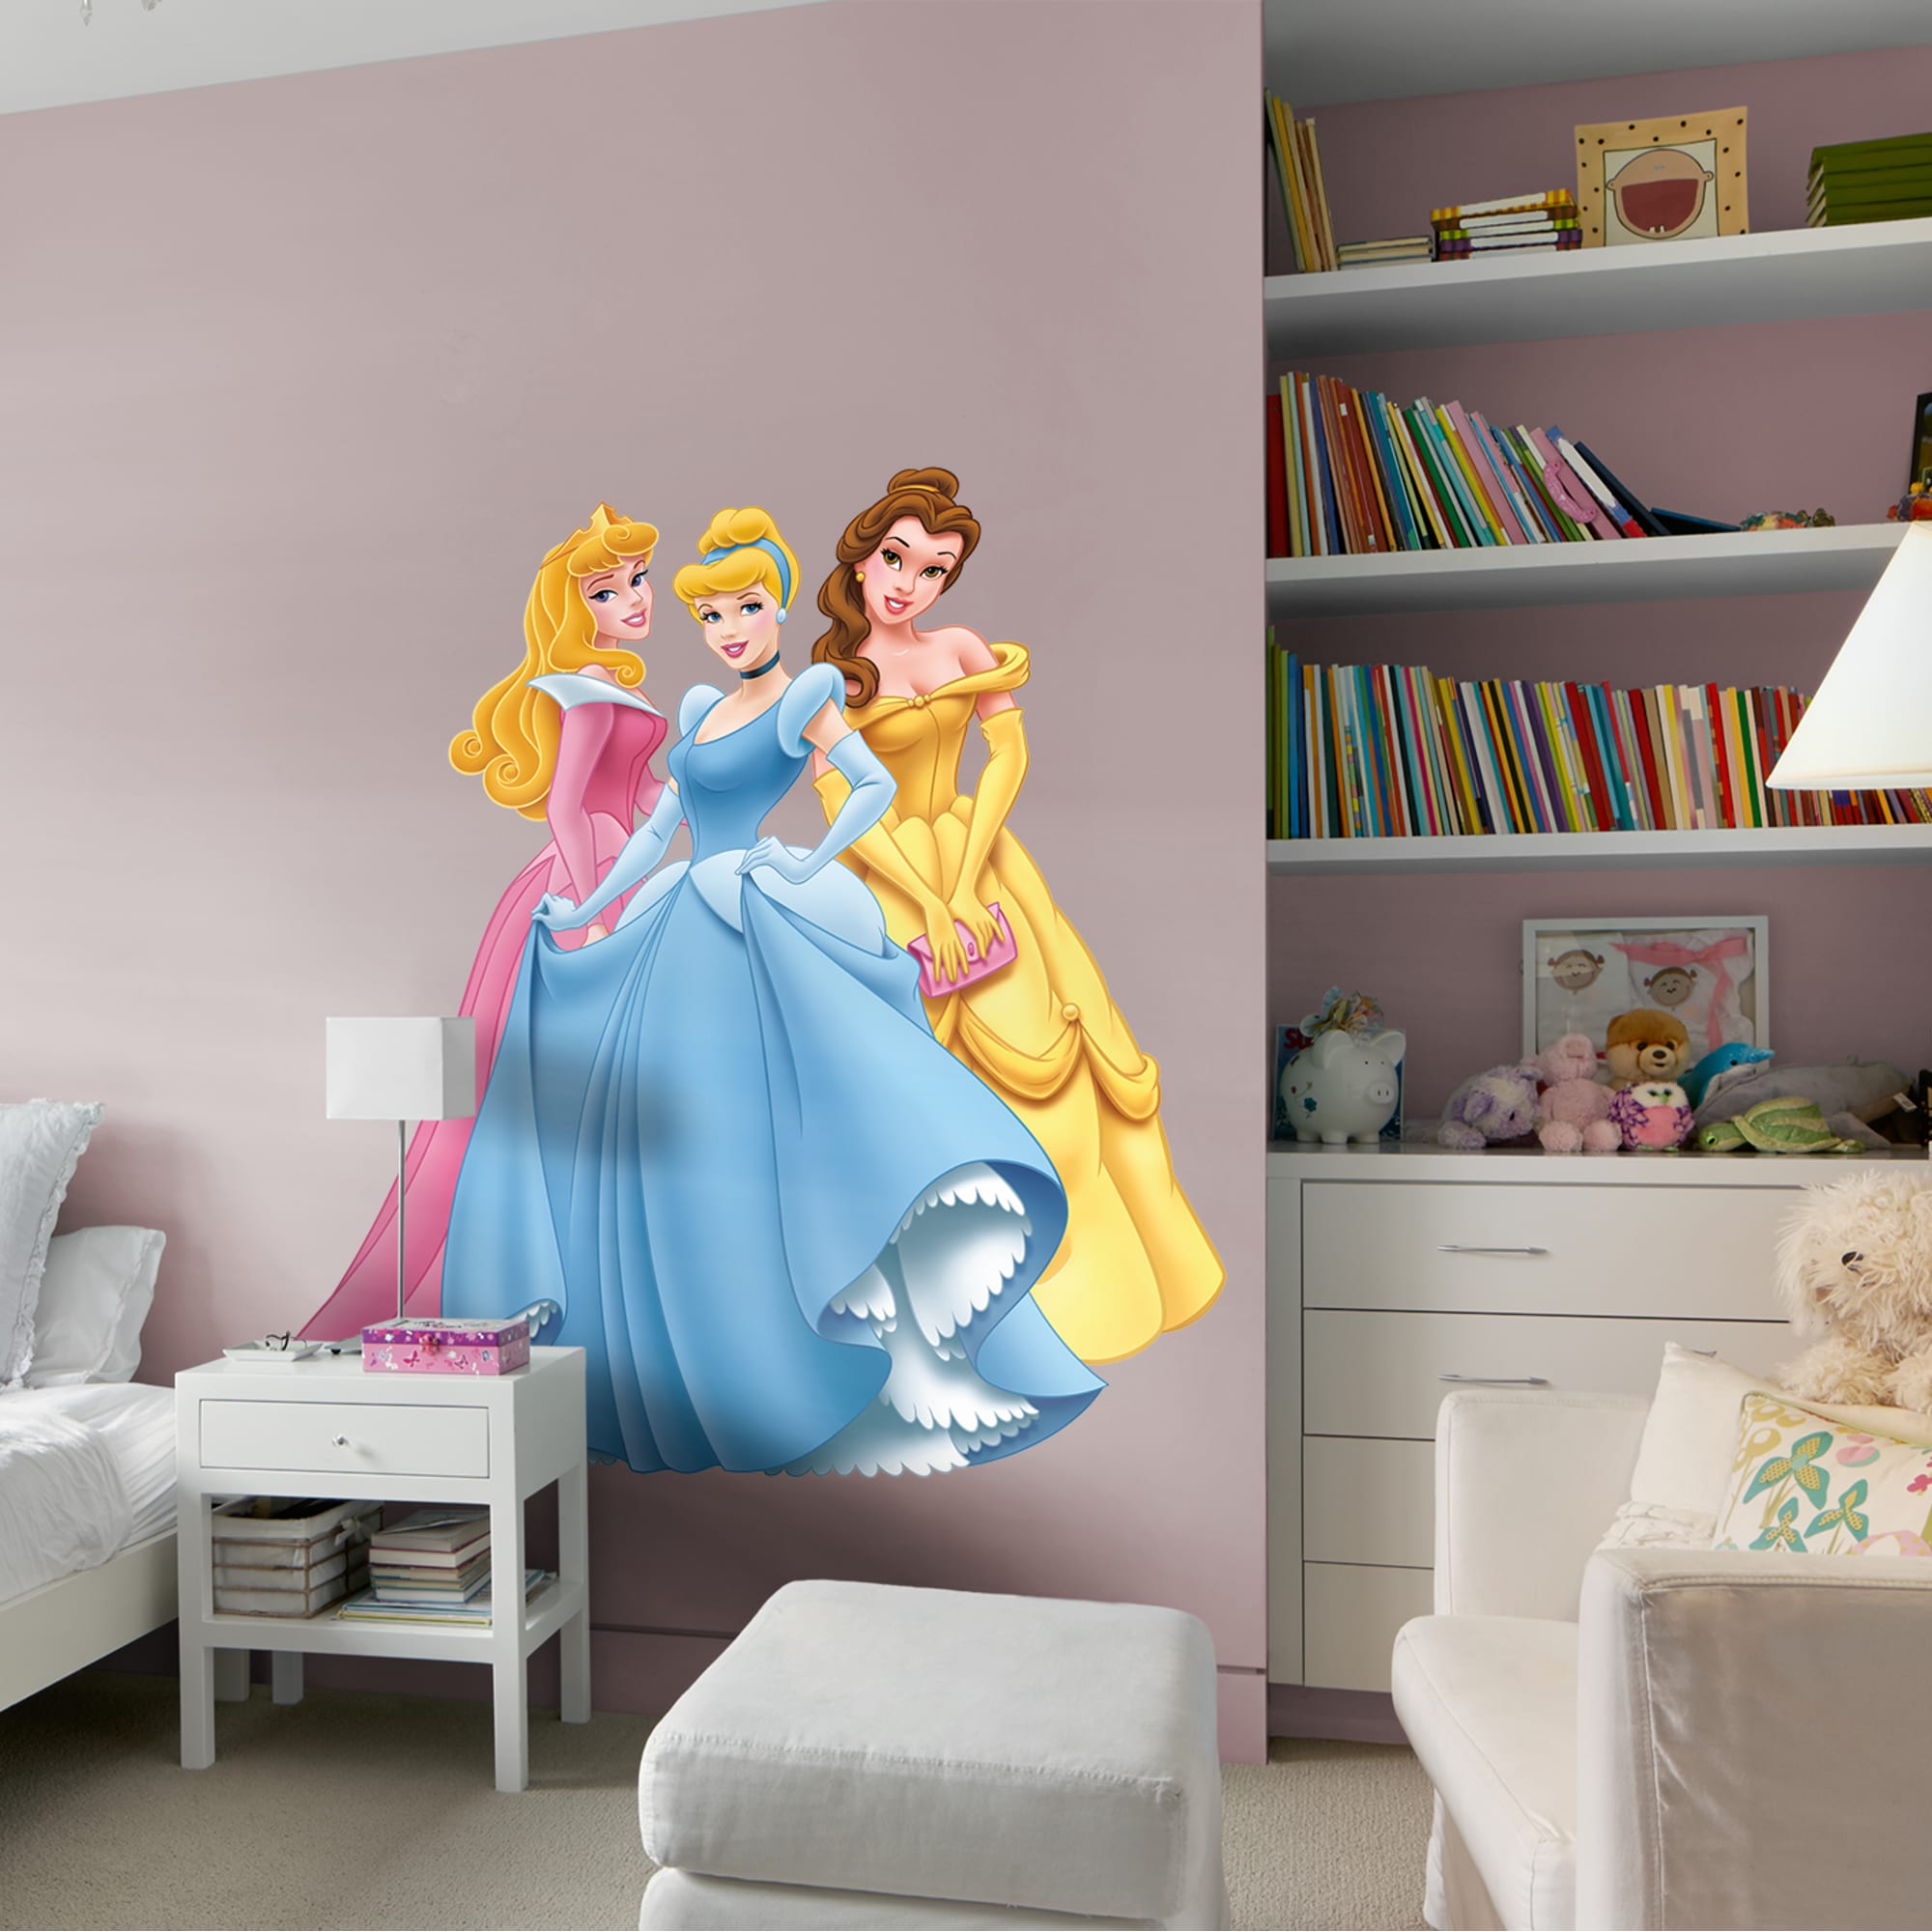 Disney Princess: Aurora, Cinderella & Belle - Officially Licensed Disney Removable Wall Decals 48.0"W x 52.0"H by Fathead | Viny